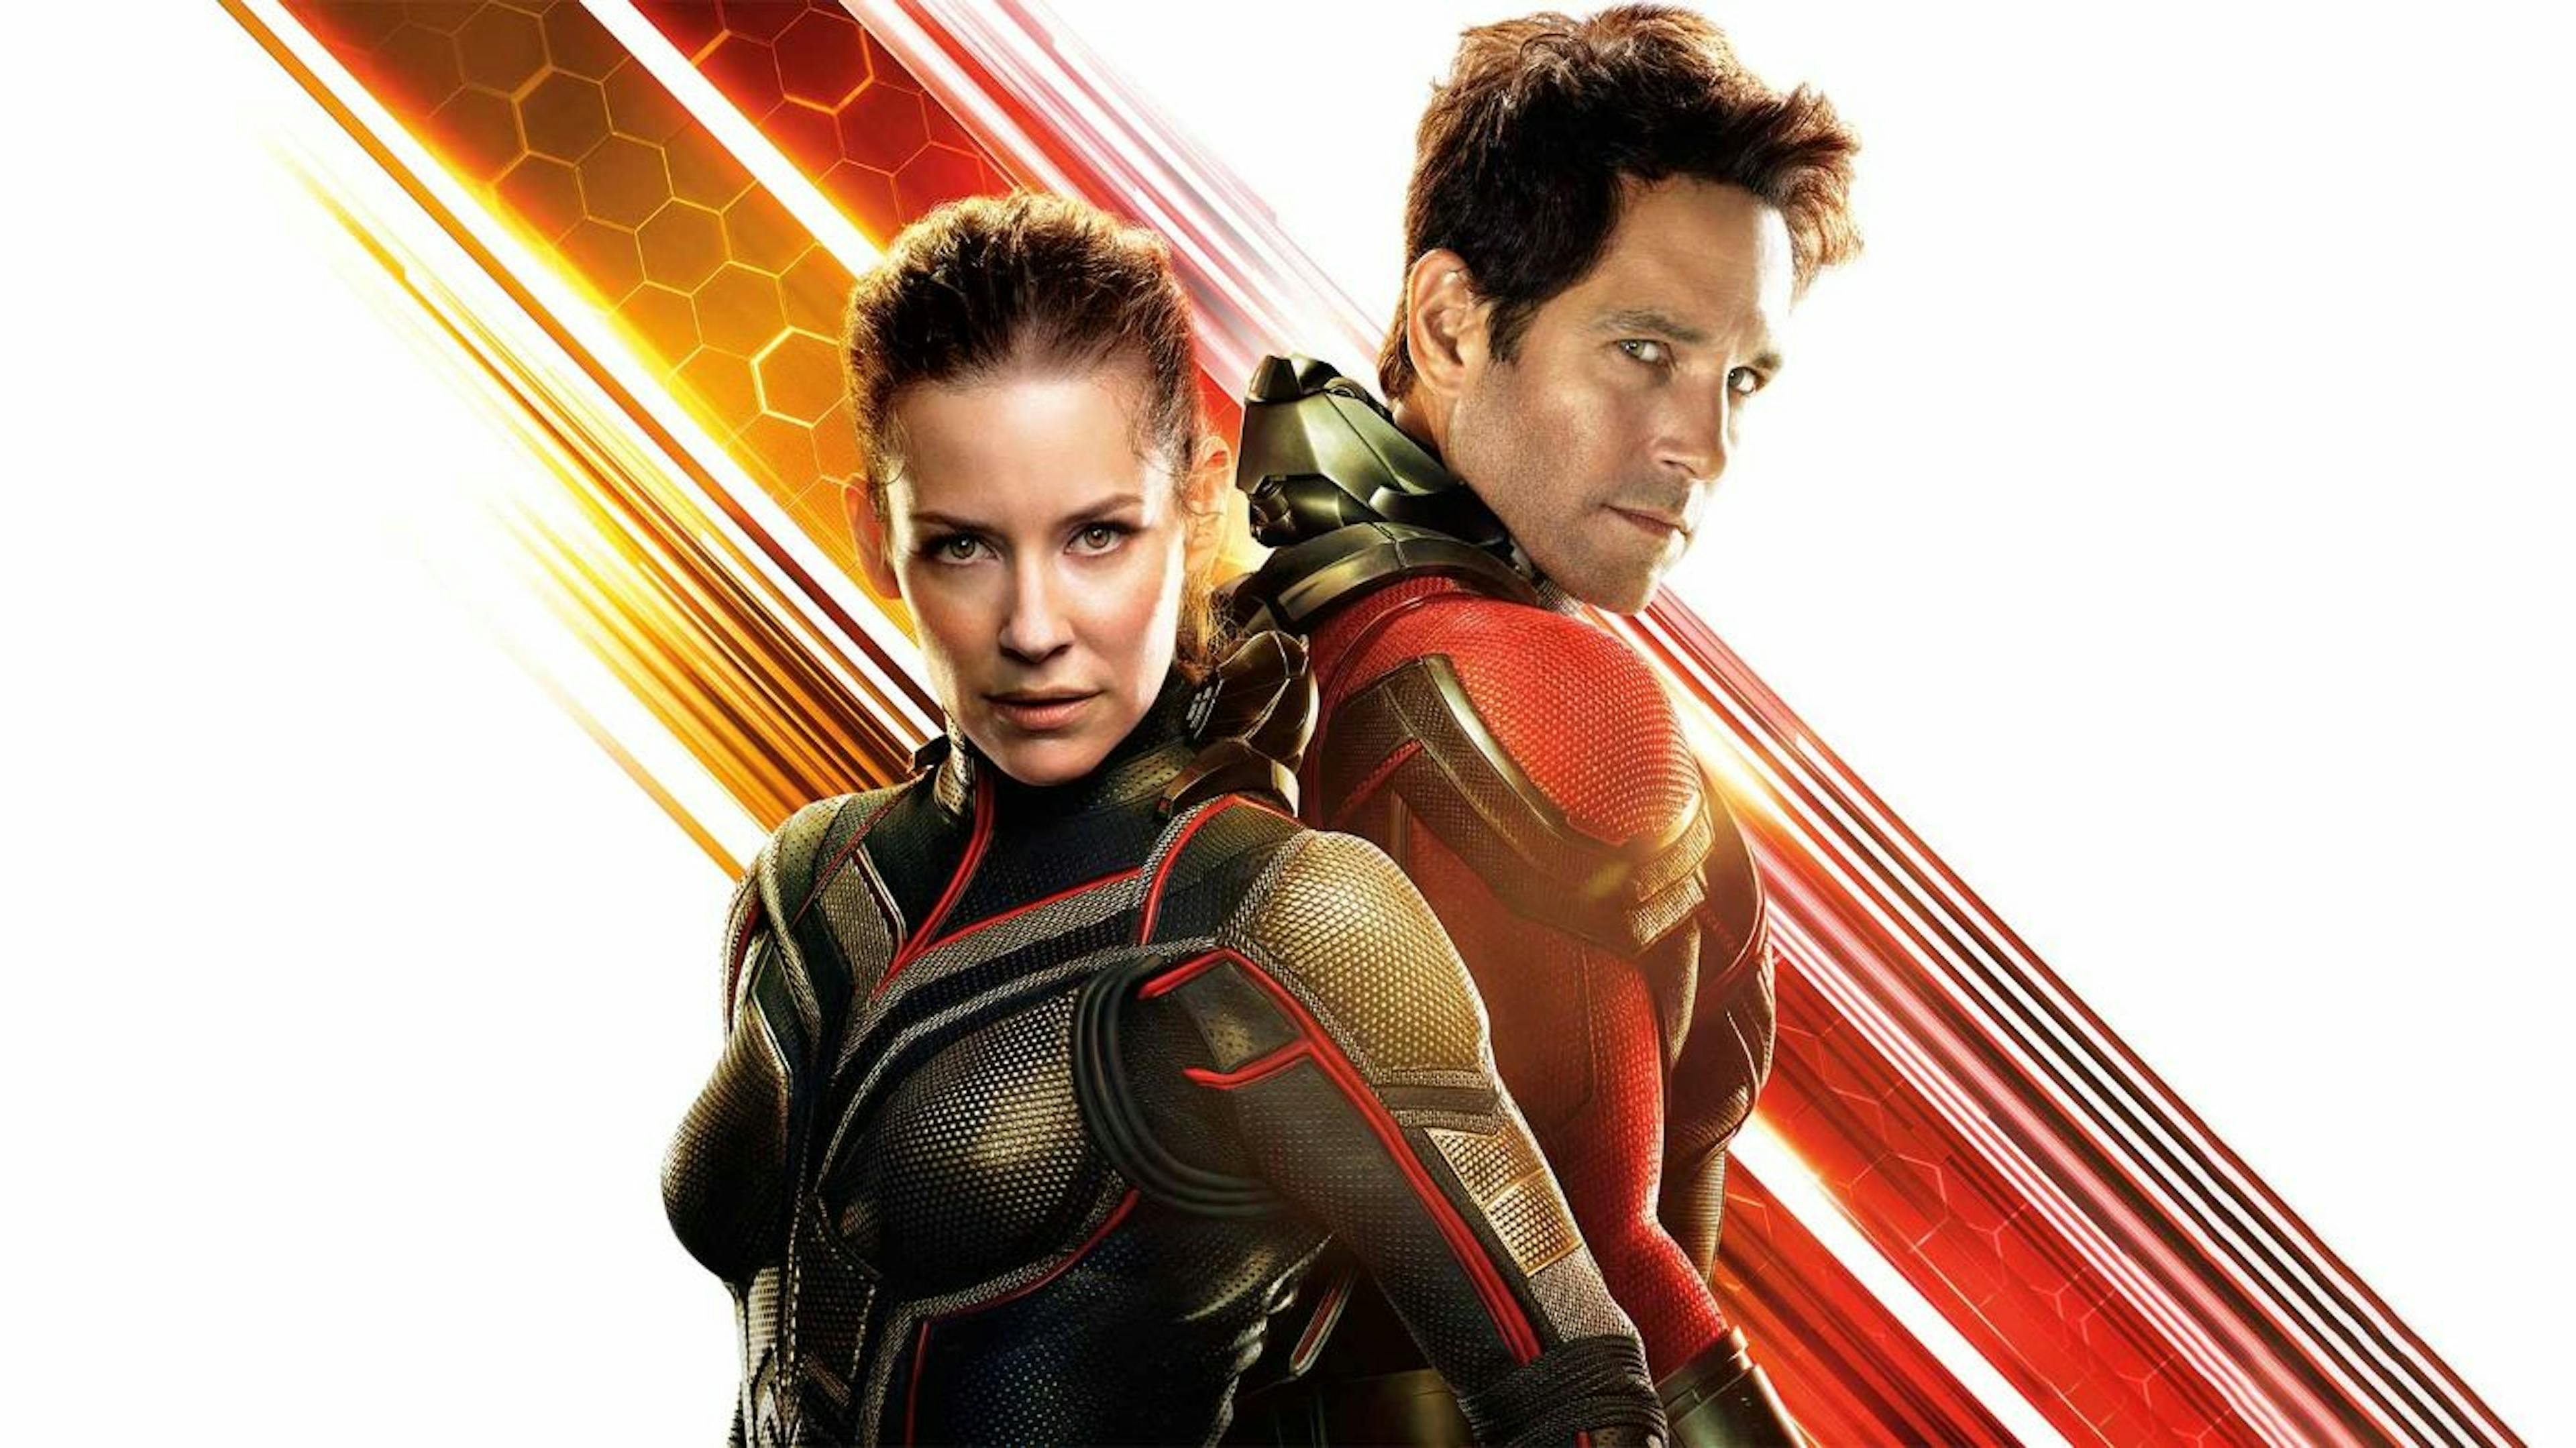 http://www.mediastinger.com/ant-man-and-the-wasp-2018-after-the-credits/